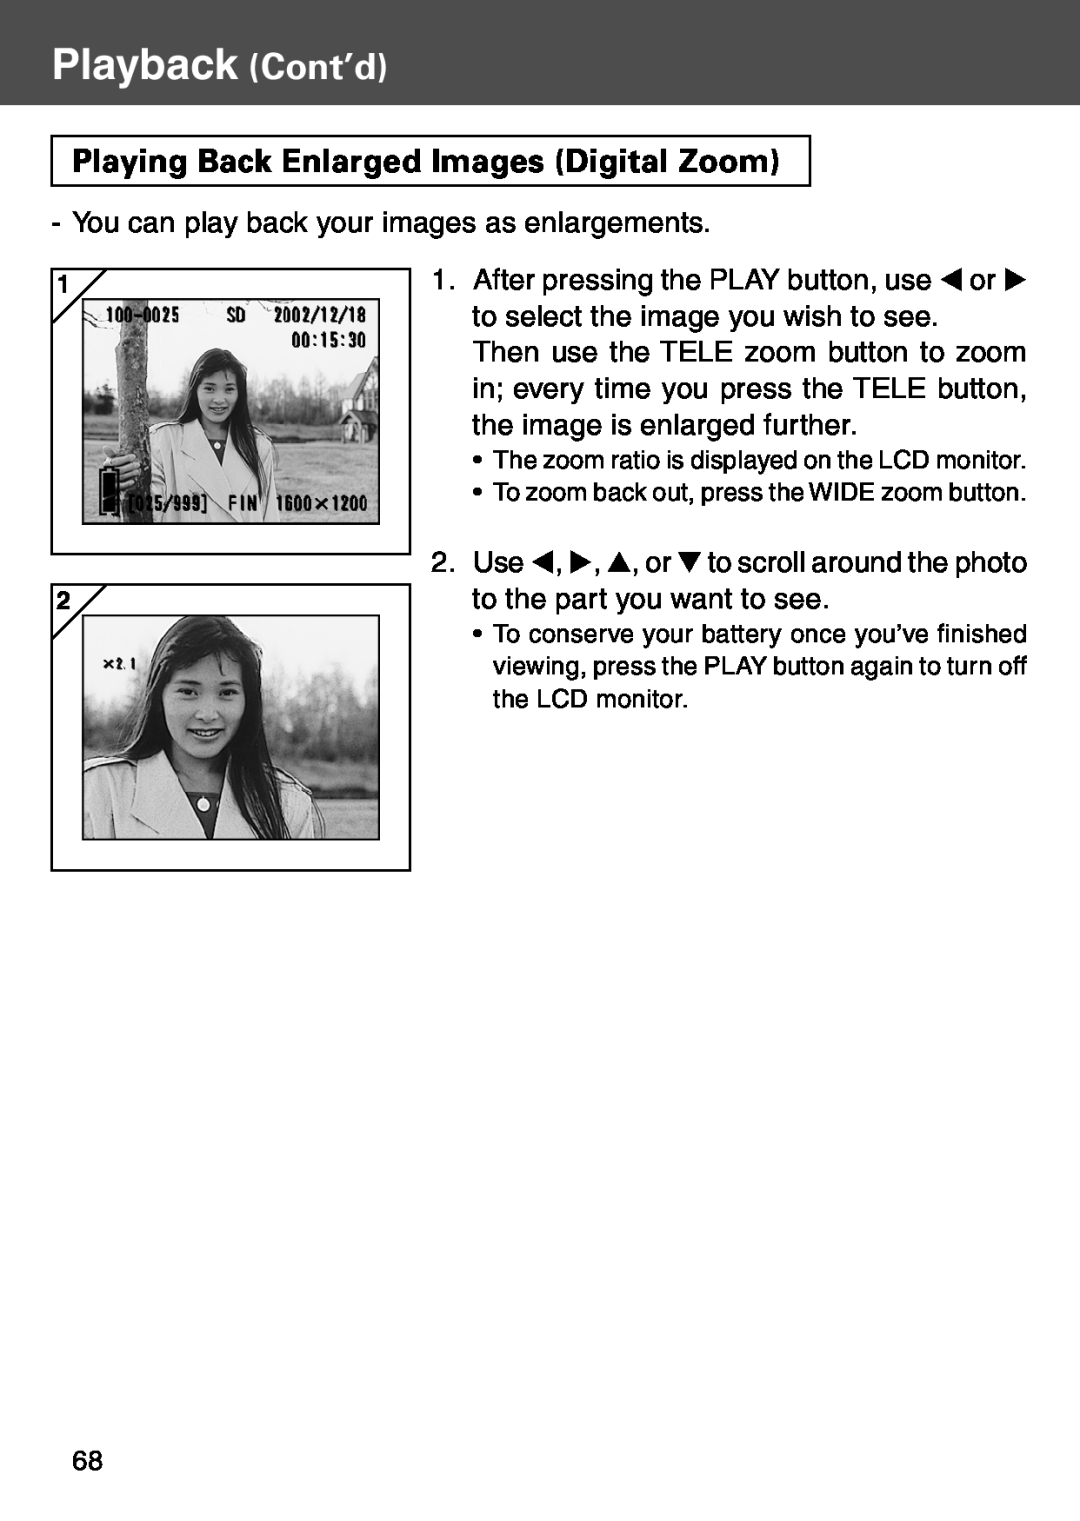 Konica Minolta KD-500Z user manual Playing Back Enlarged Images Digital Zoom, Playback Cont’d 